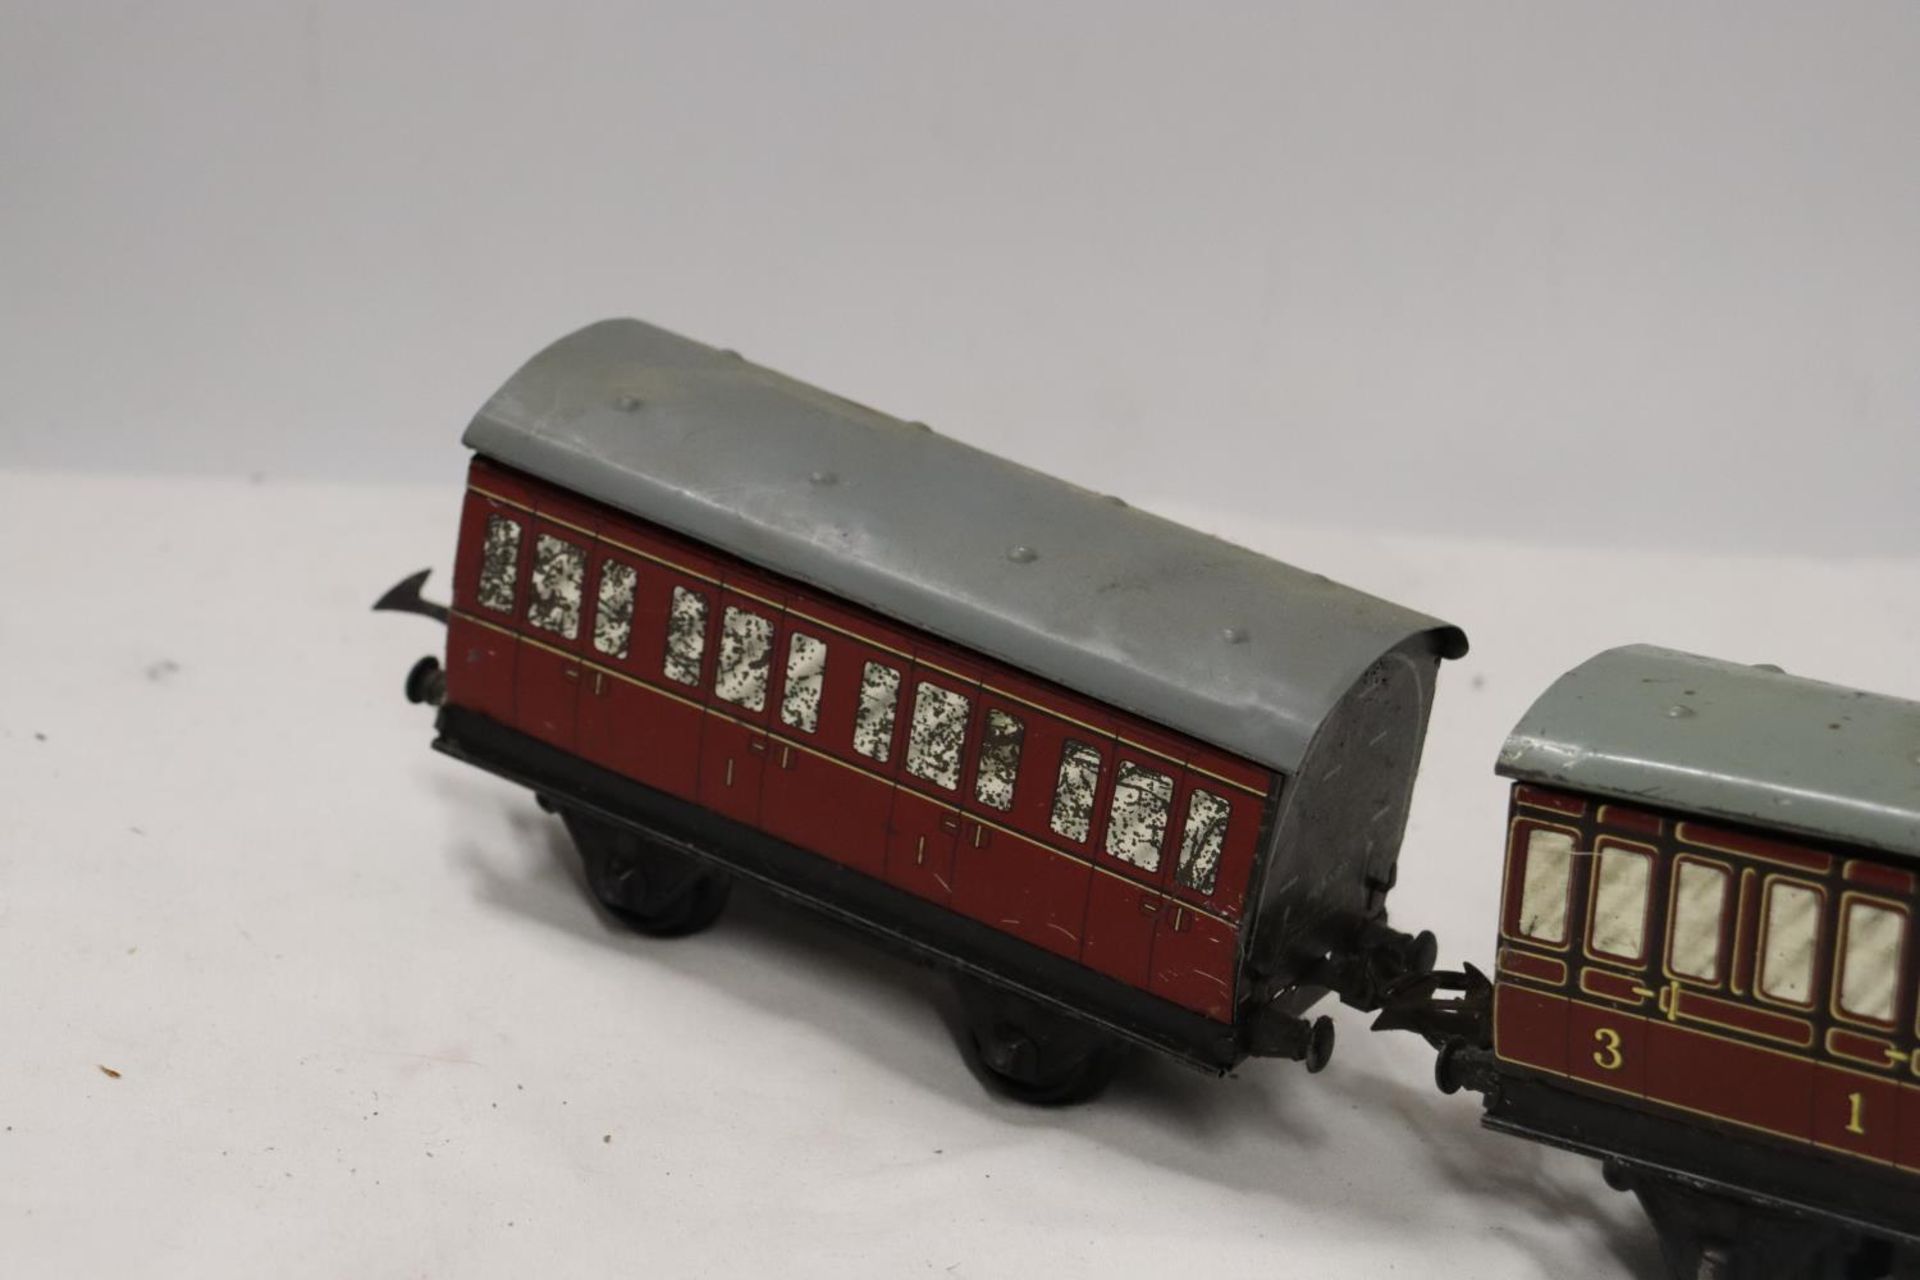 TWO HORNBY .30 GAUGE METAL RAILWAY CARRIAGES LENGTH 17 CM - Image 7 of 7